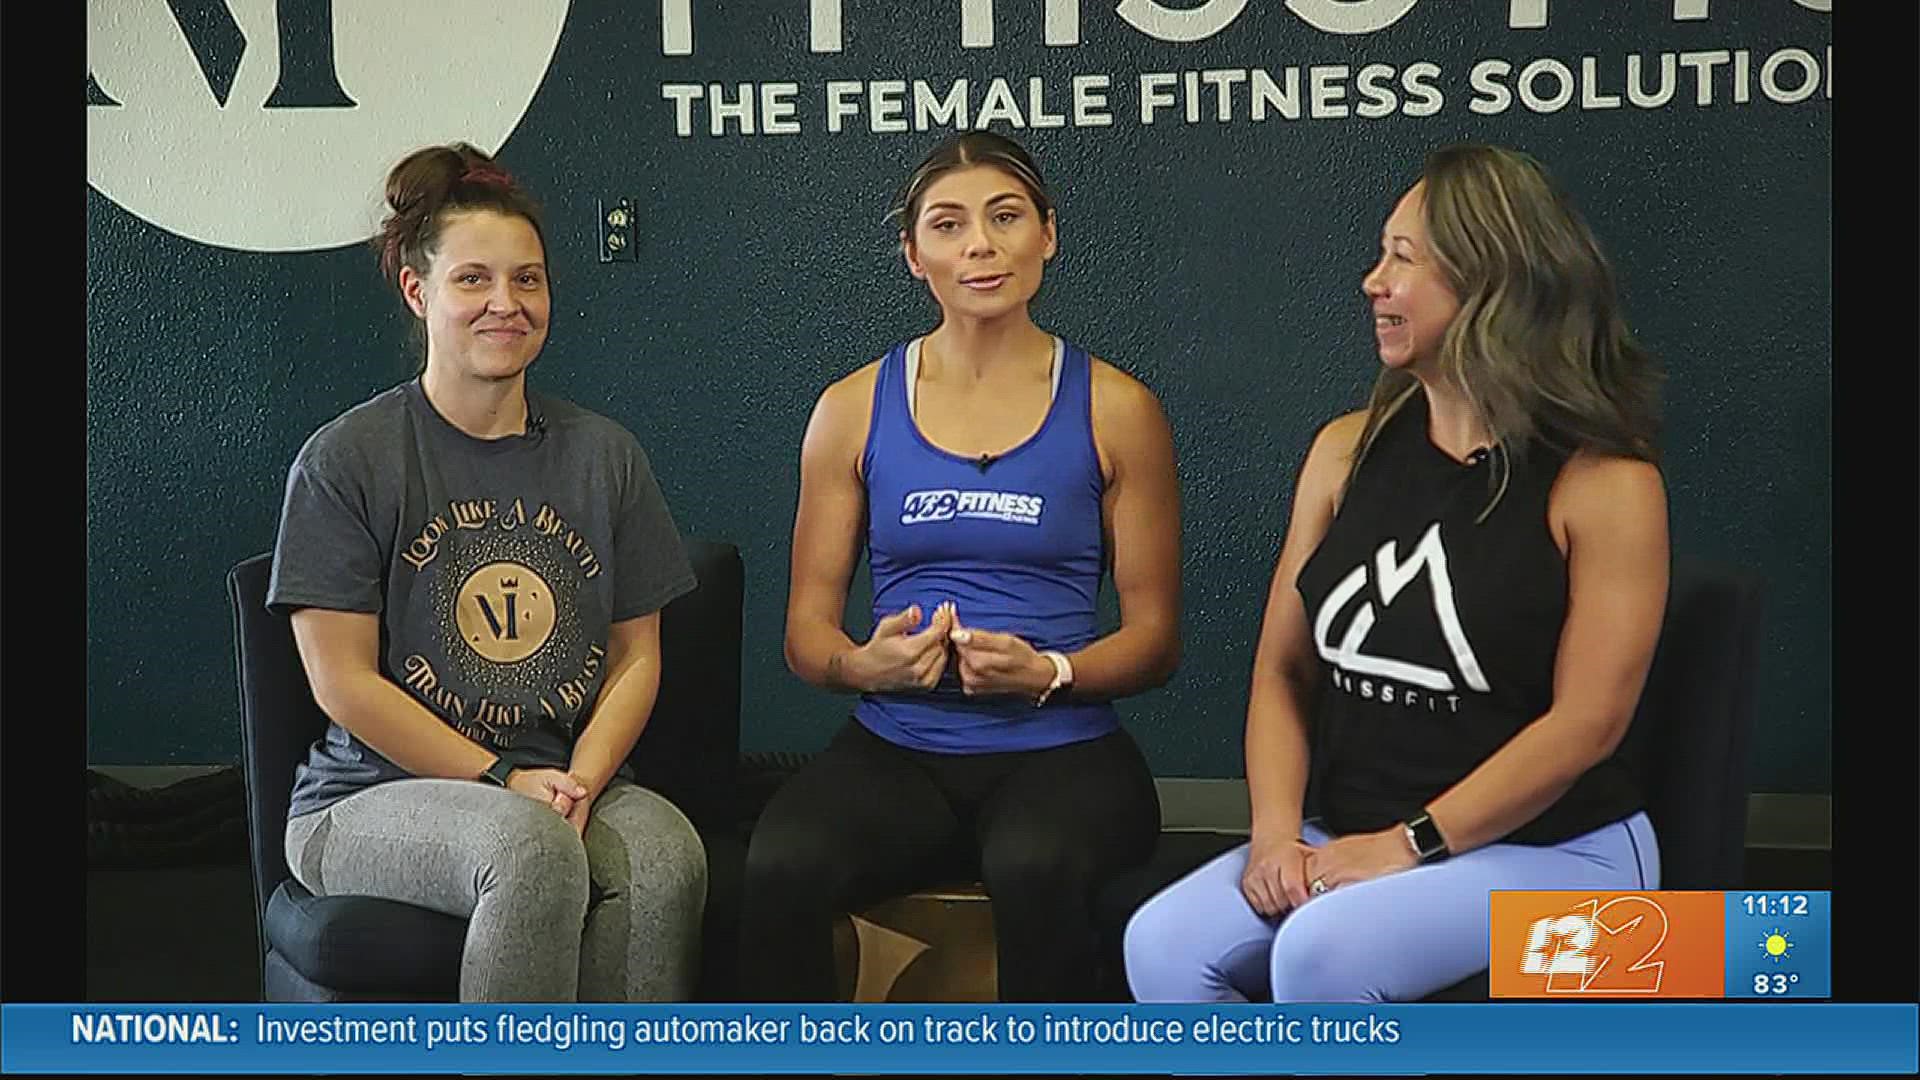 Today on 409Fitness we're talking about a stress relief breathing exercise called "box breathing."